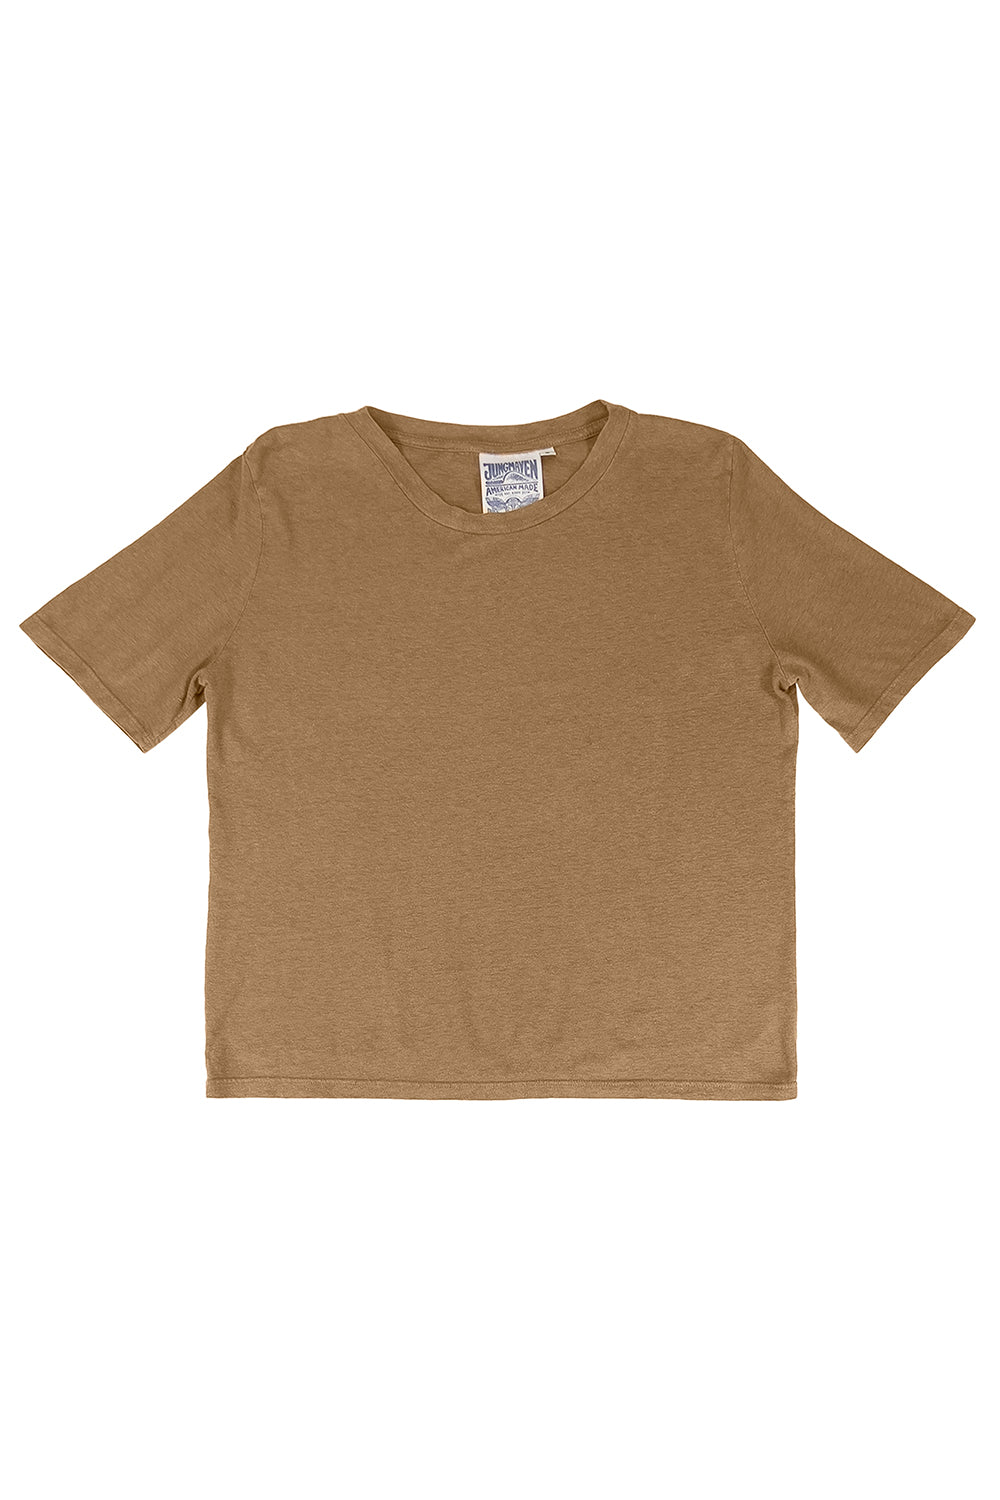 Silverlake Cropped Tee | Jungmaven Hemp Clothing & Accessories / Color: Coyote